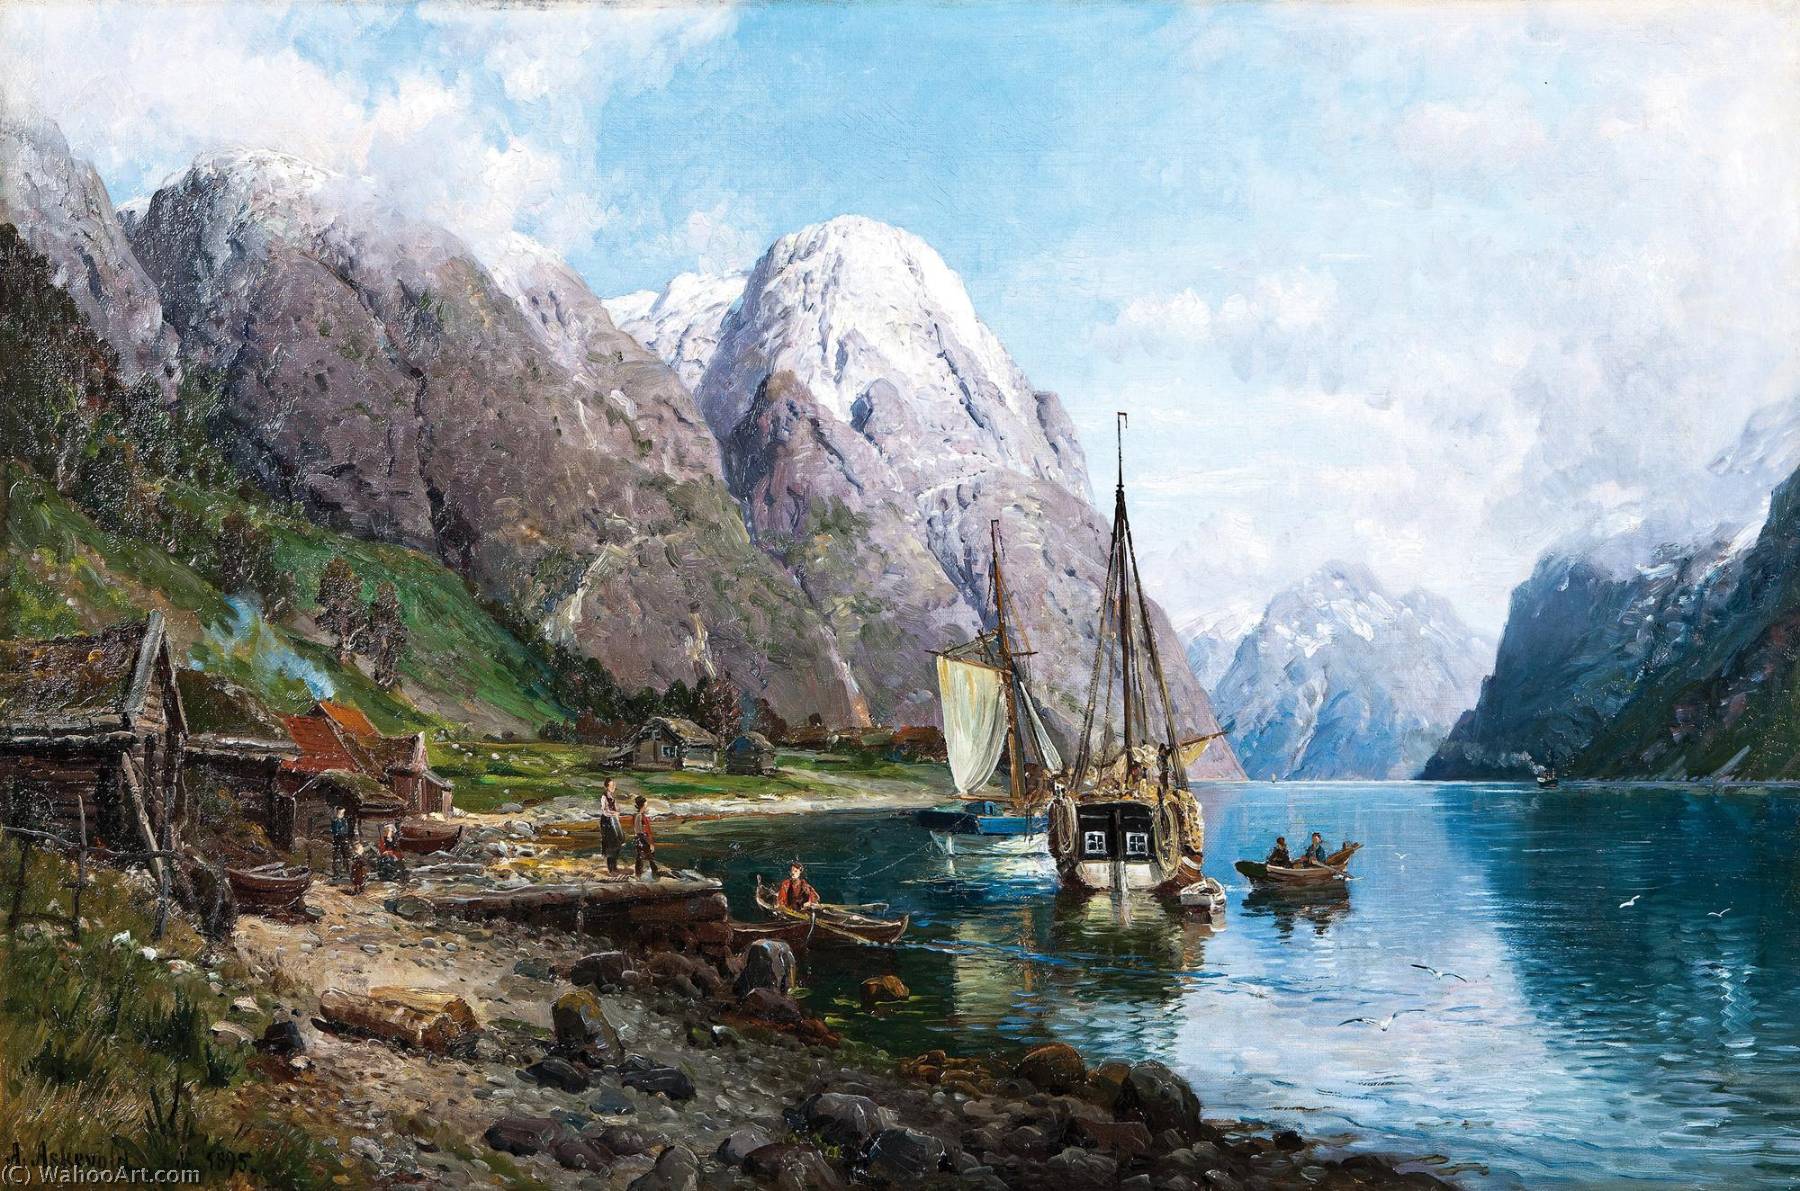 WikiOO.org - Enciclopedia of Fine Arts - Pictura, lucrări de artă Anders Monsen Askevold - Harbor in the Sognefjord (also known as From a Harbor in the Sognefjord)